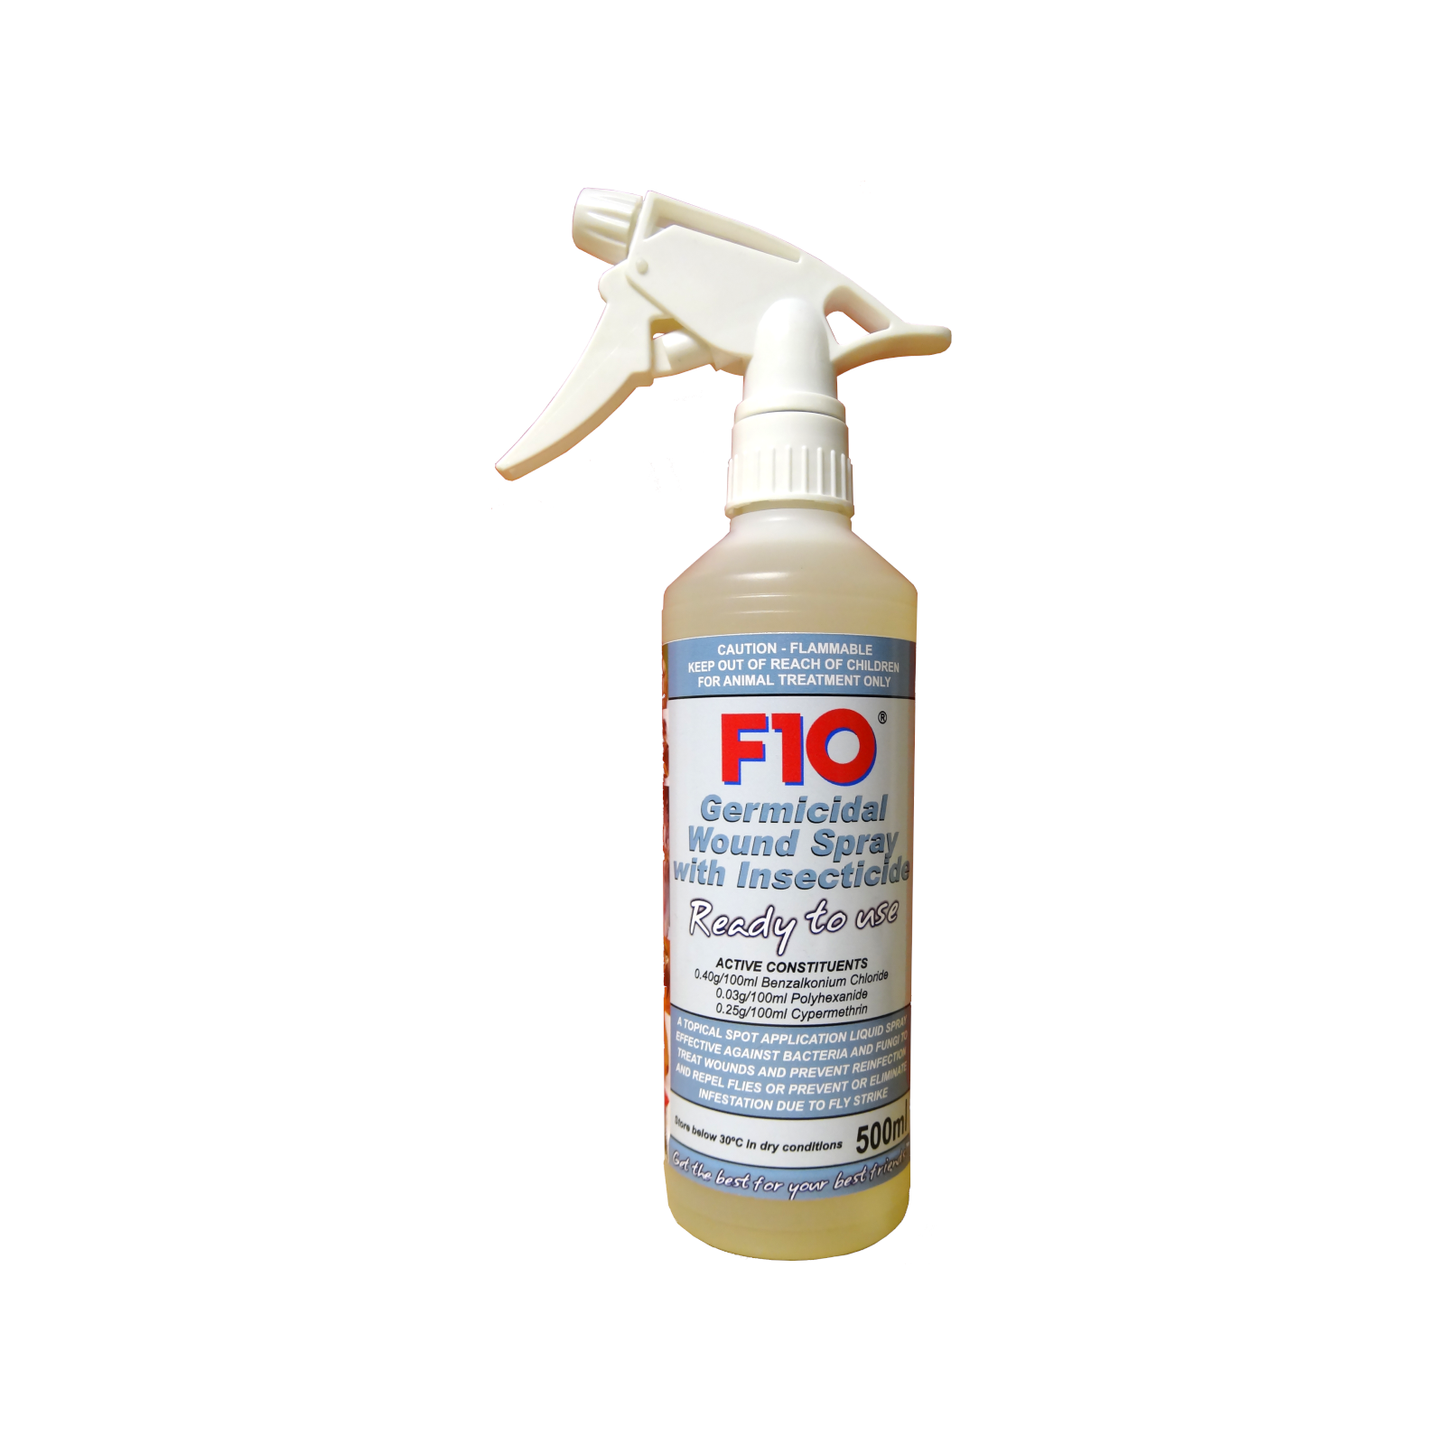 A 500ml bottle of Germicidal Wound Spray with Insecticide